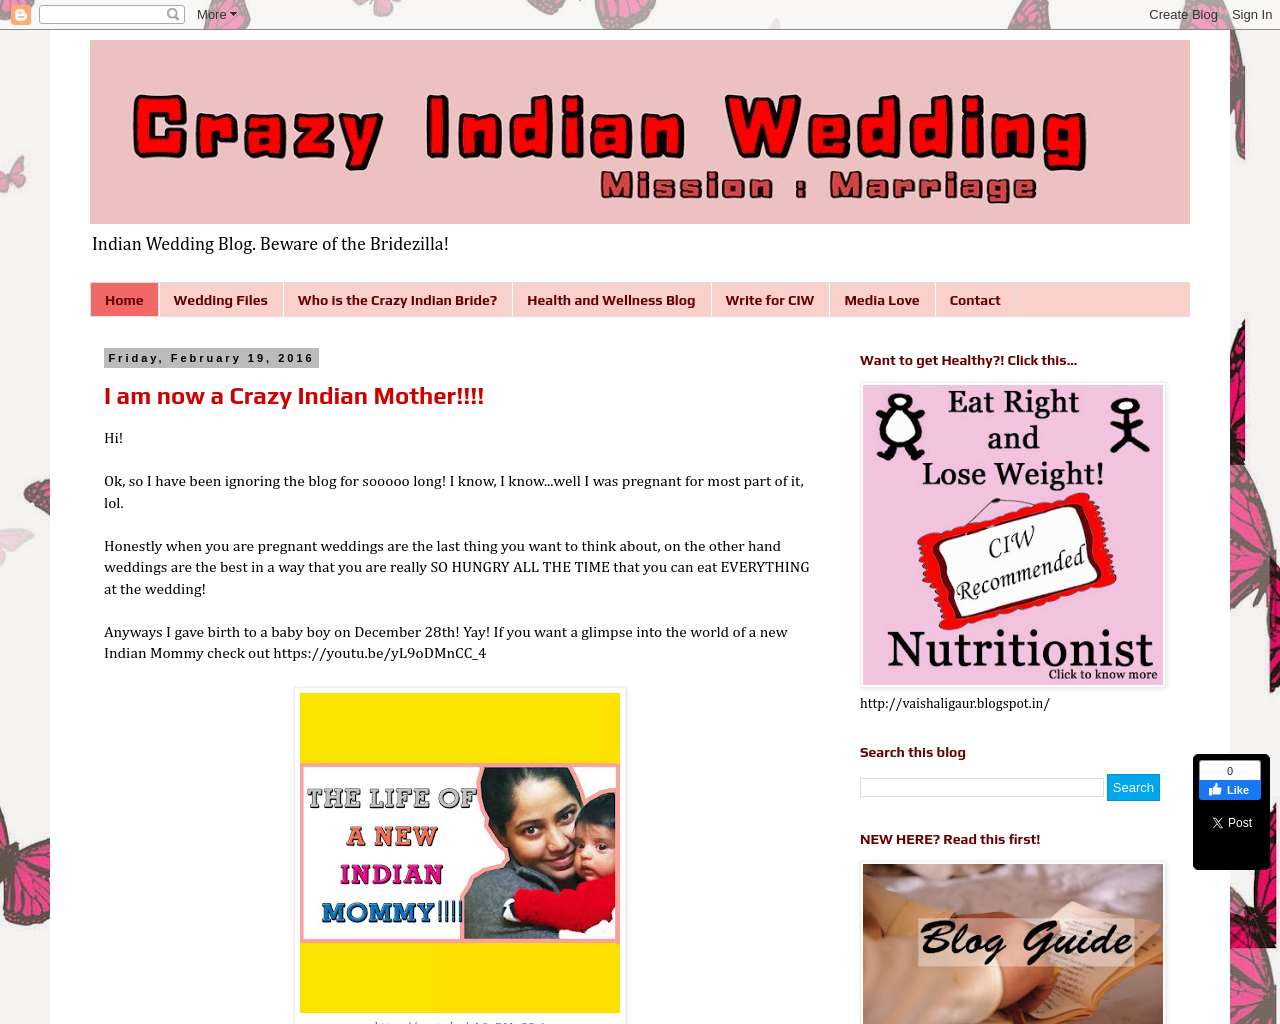 Mission Marriage : Crazy Indian Wedding